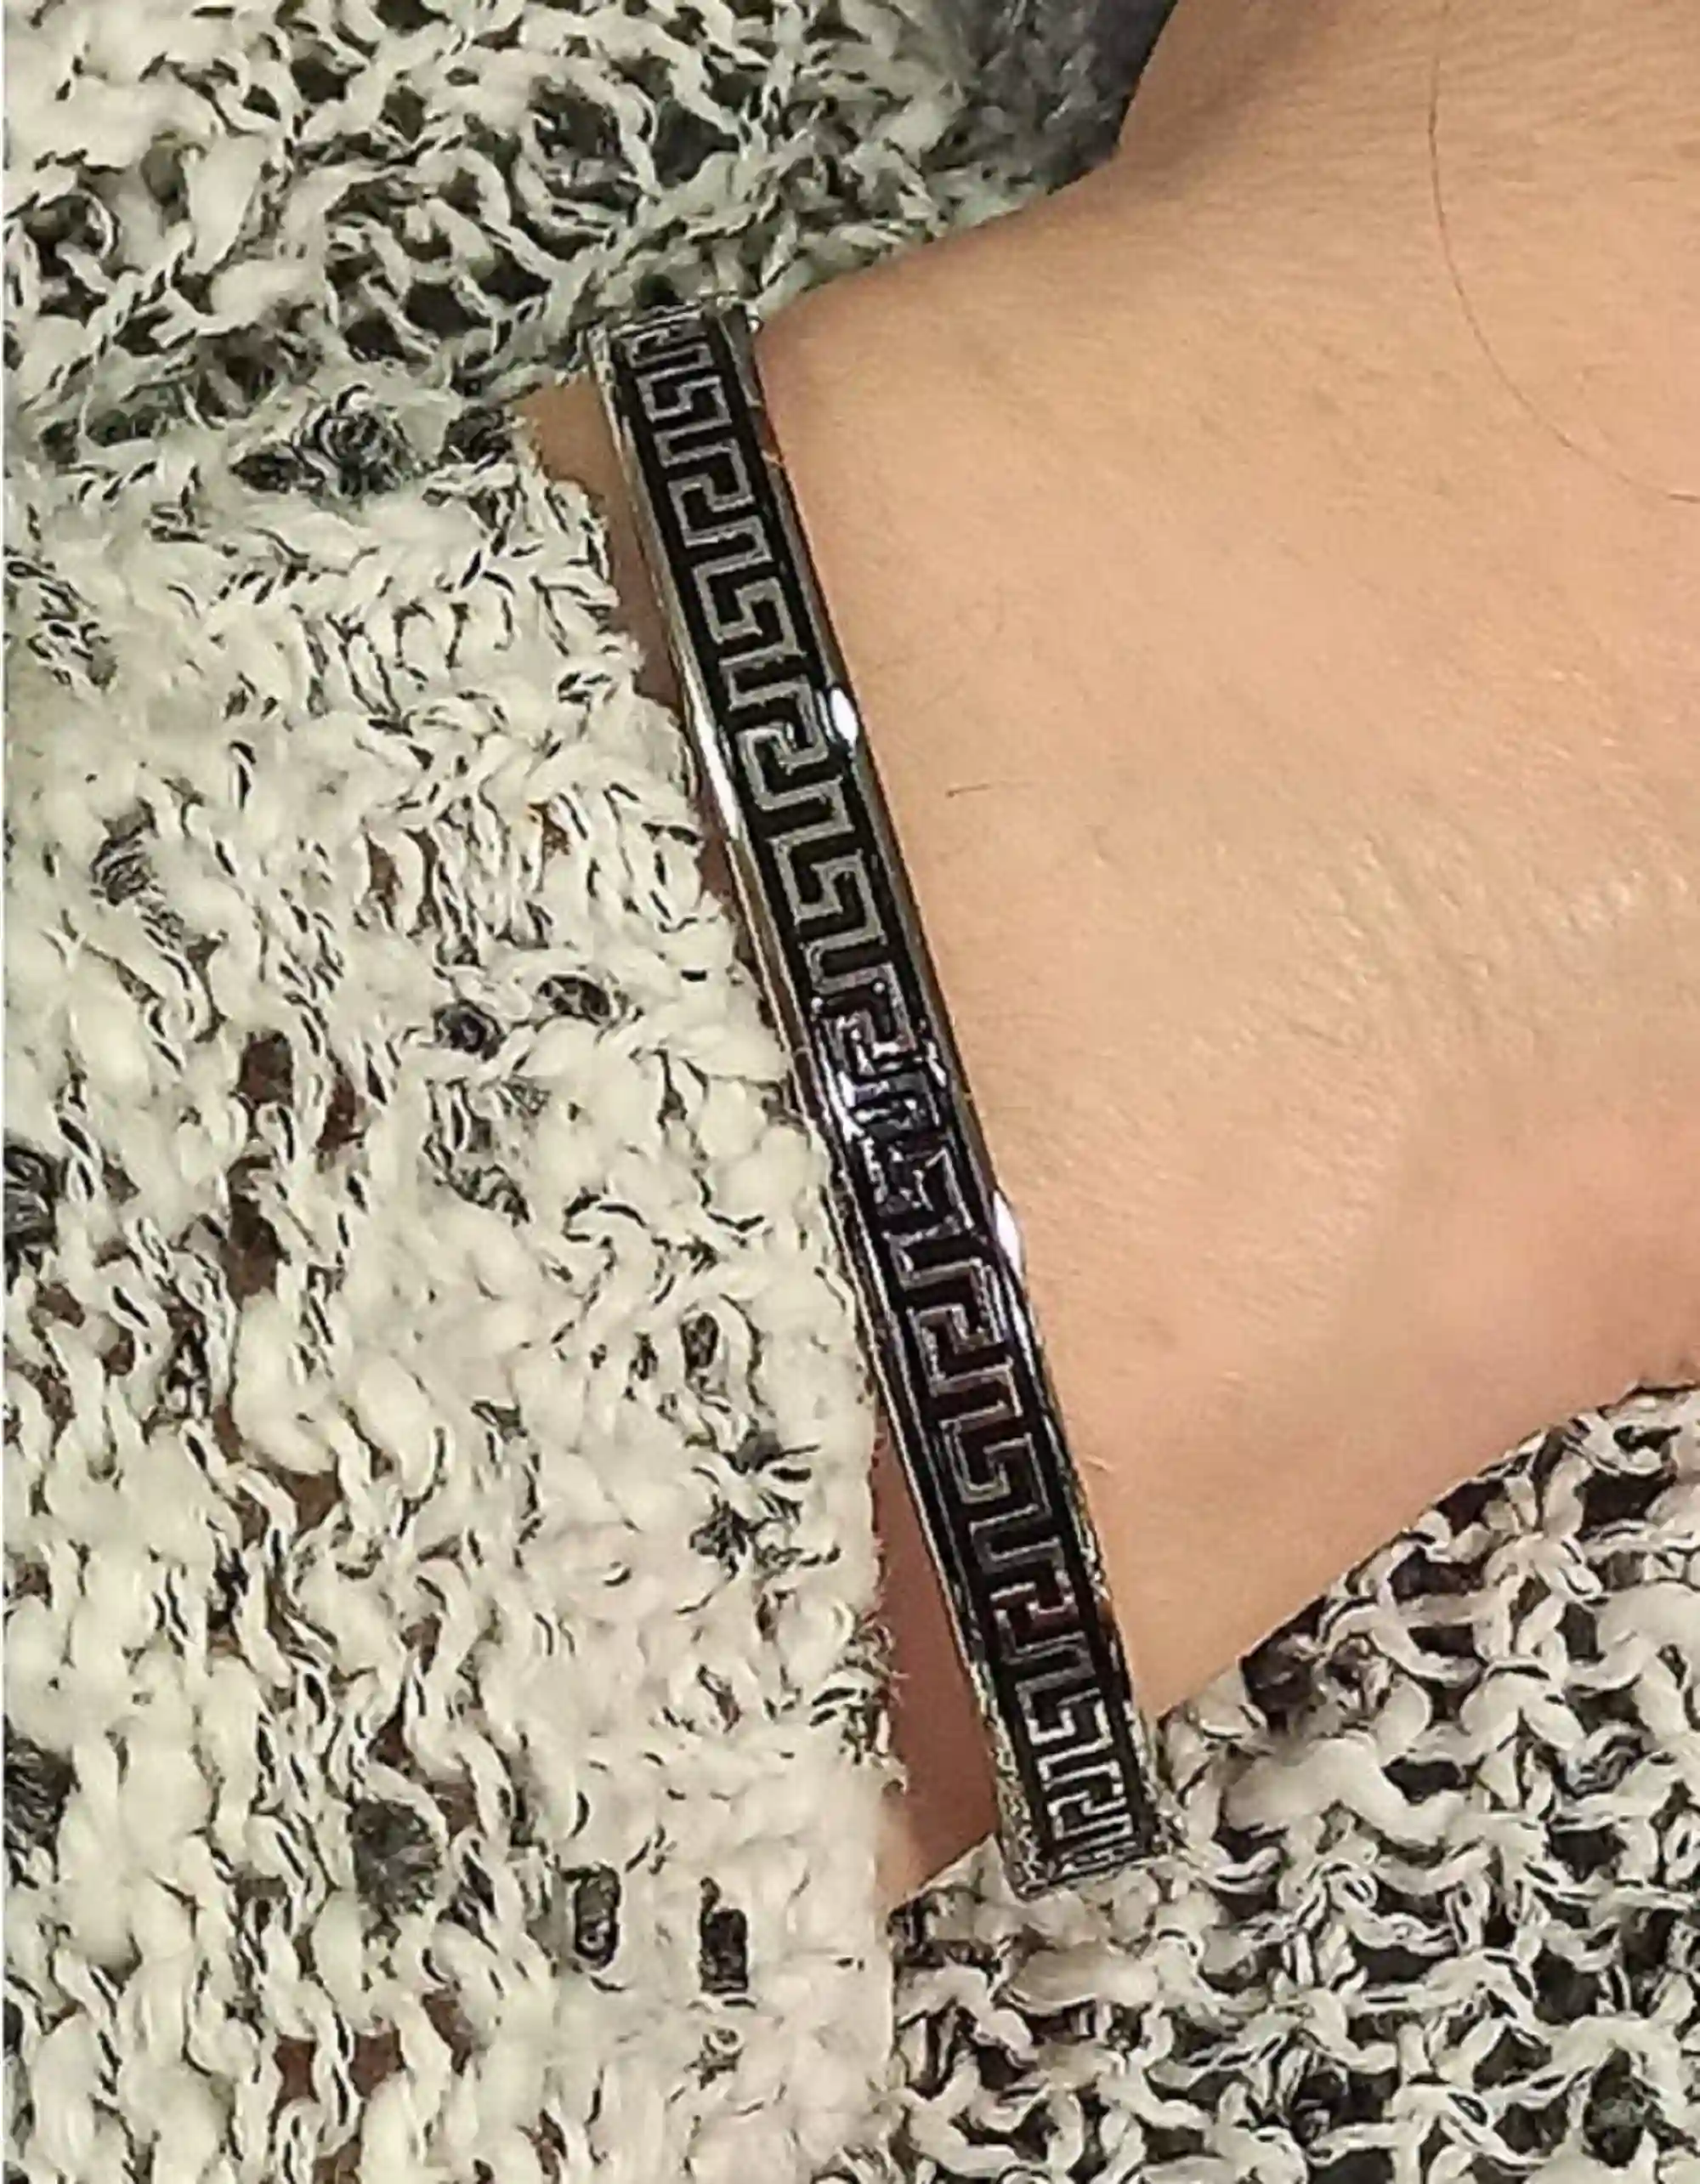 Silver Greek Key Jewelry/ Graduation gifts for her/ MEANDER Bracelet for women / Ancient Greece Gift/Symbolic Prosperity Luck Life Love/ 5mm 